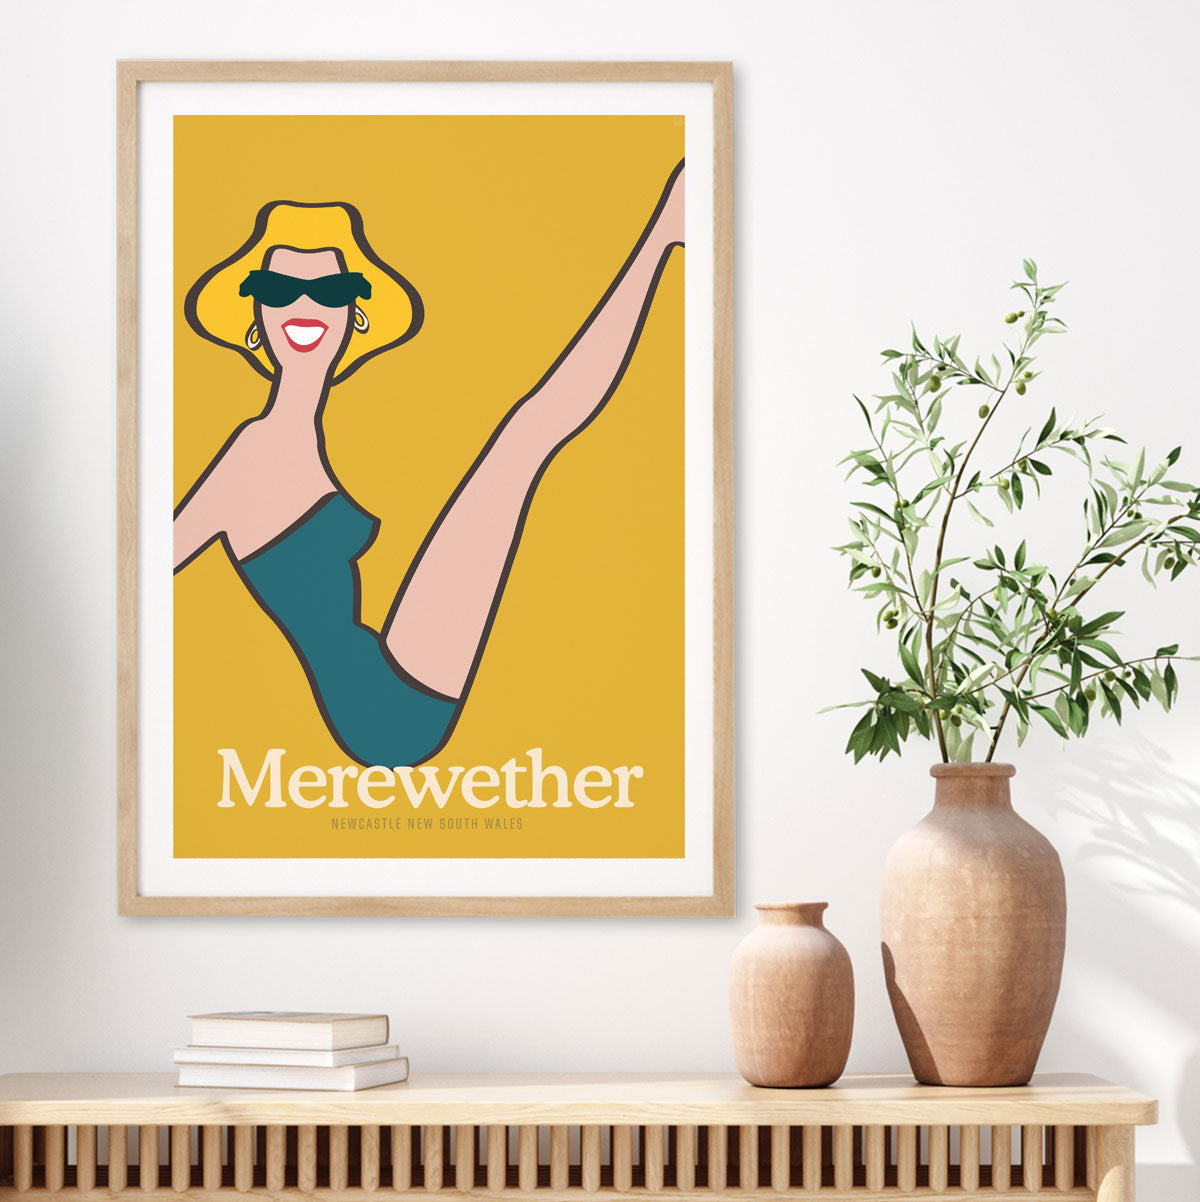 Merewether Beach Gal retro vintage poster print from Places We Luv